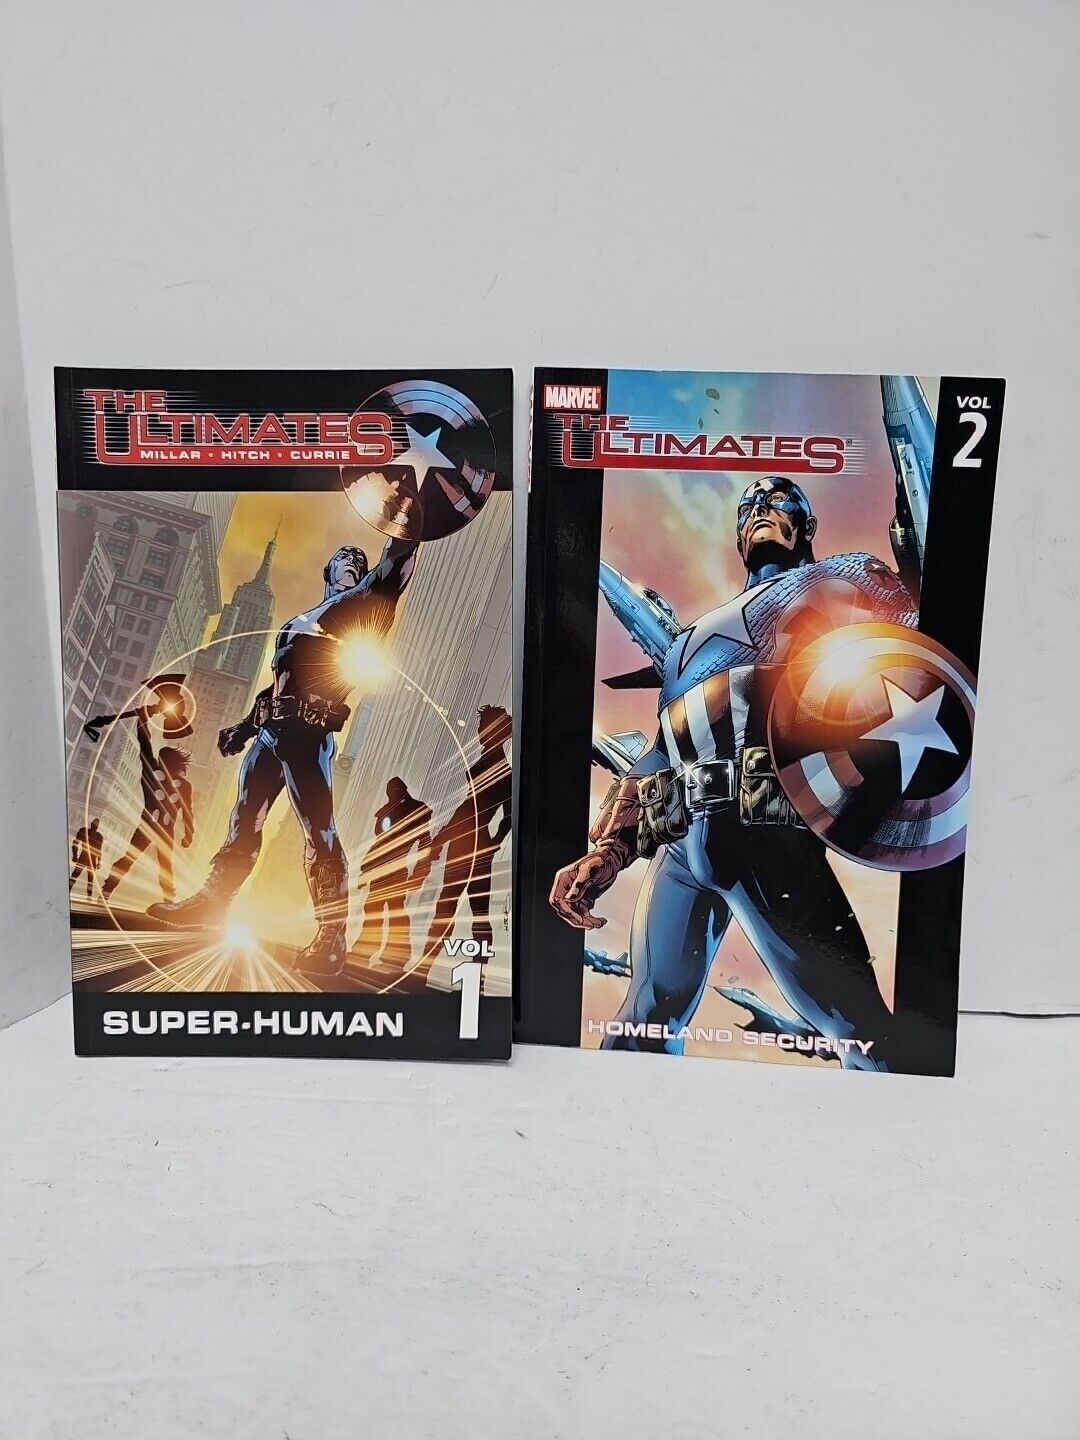 The Ultimates Super Human Volume 1 And Volume 2 Homeland Security